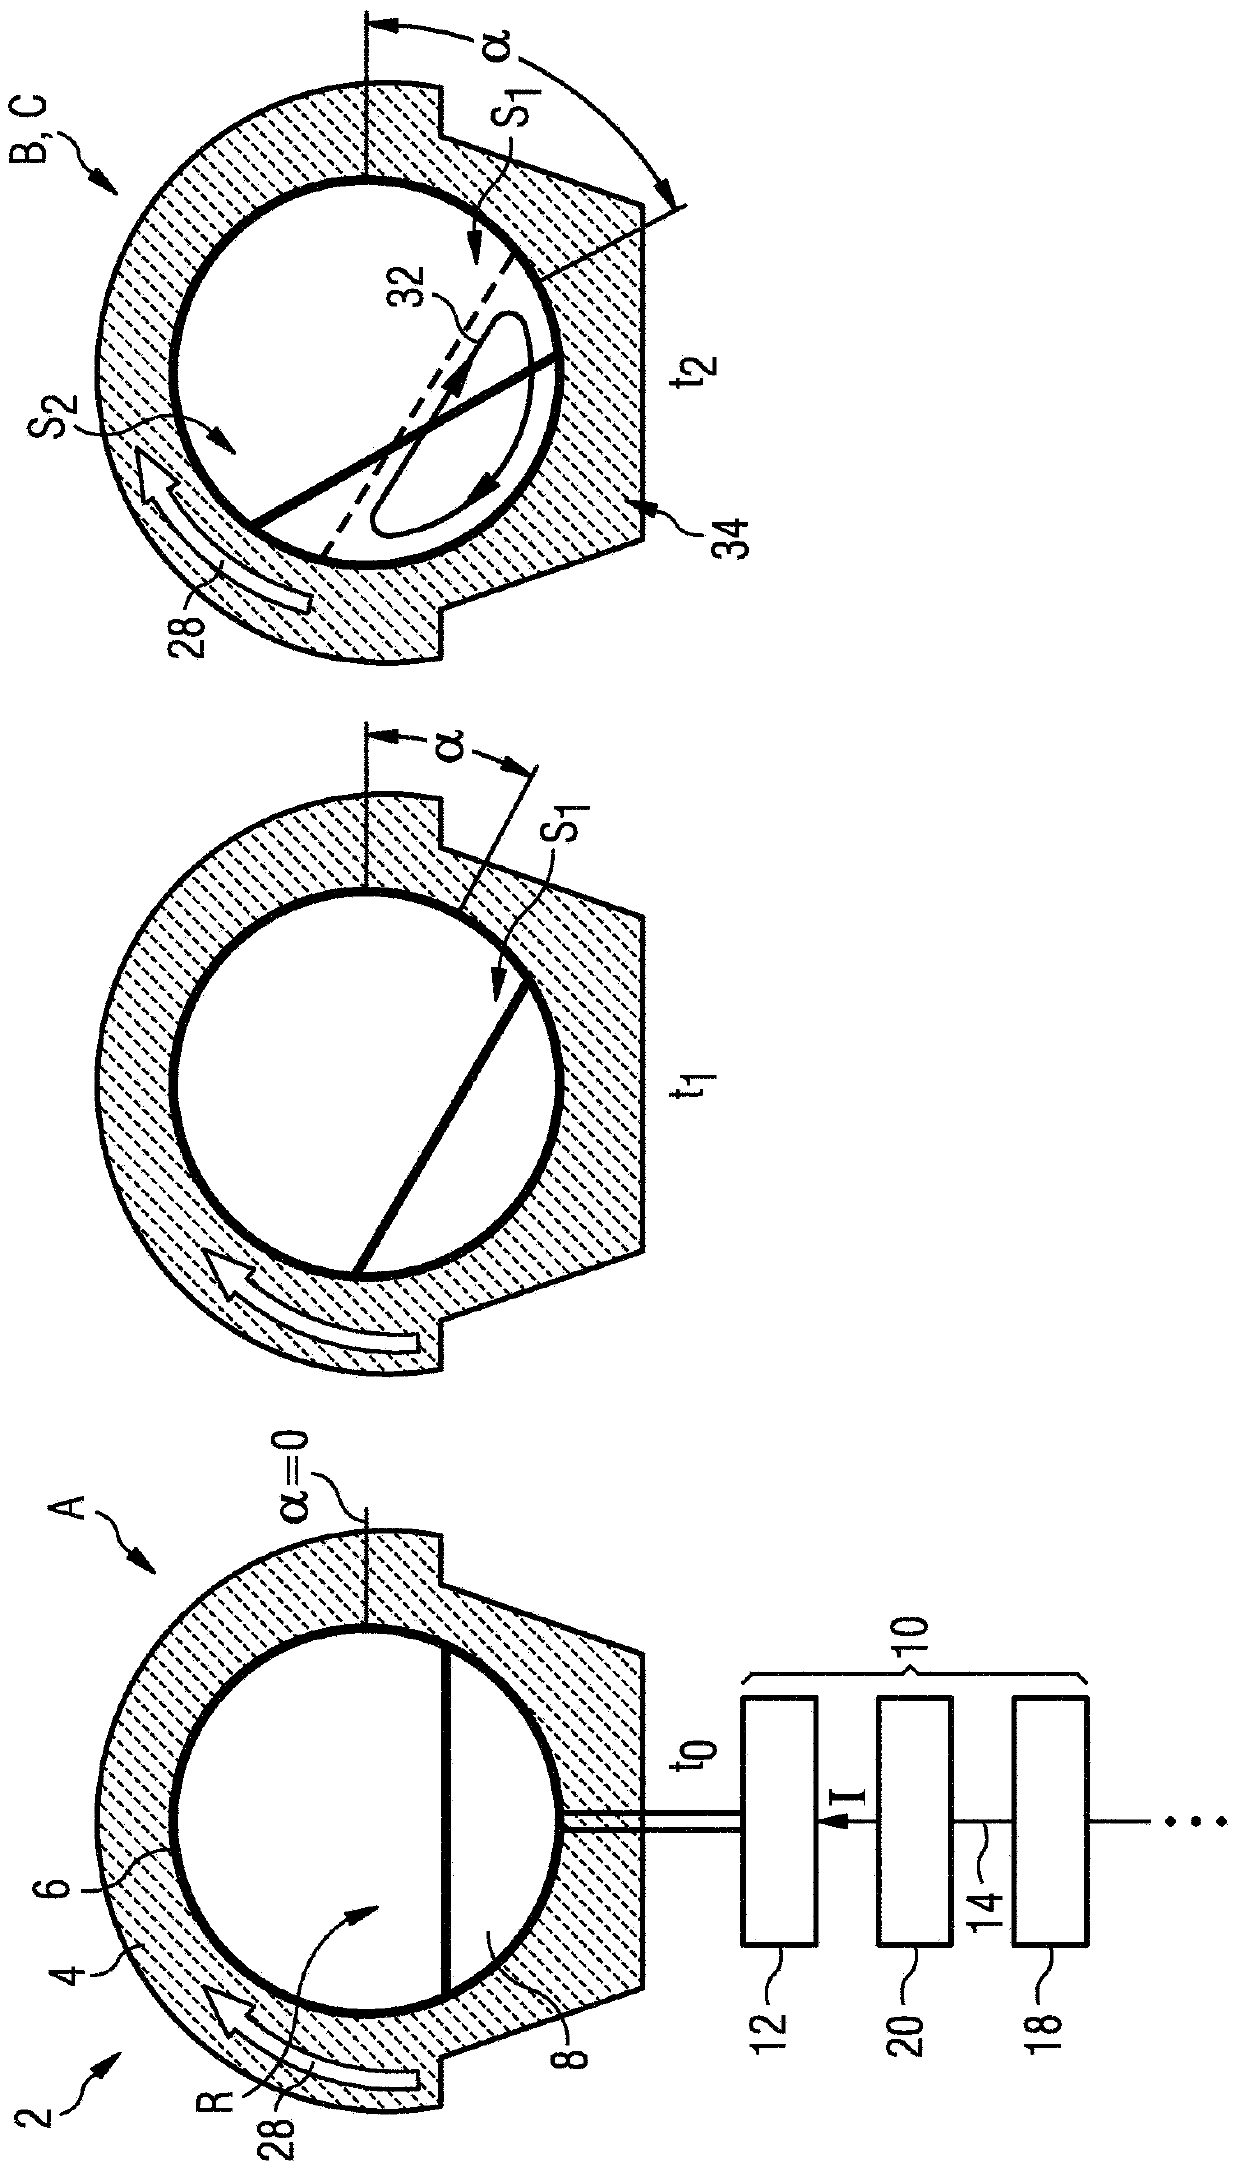 Drive system for a ball mill and method for operating a ball mill